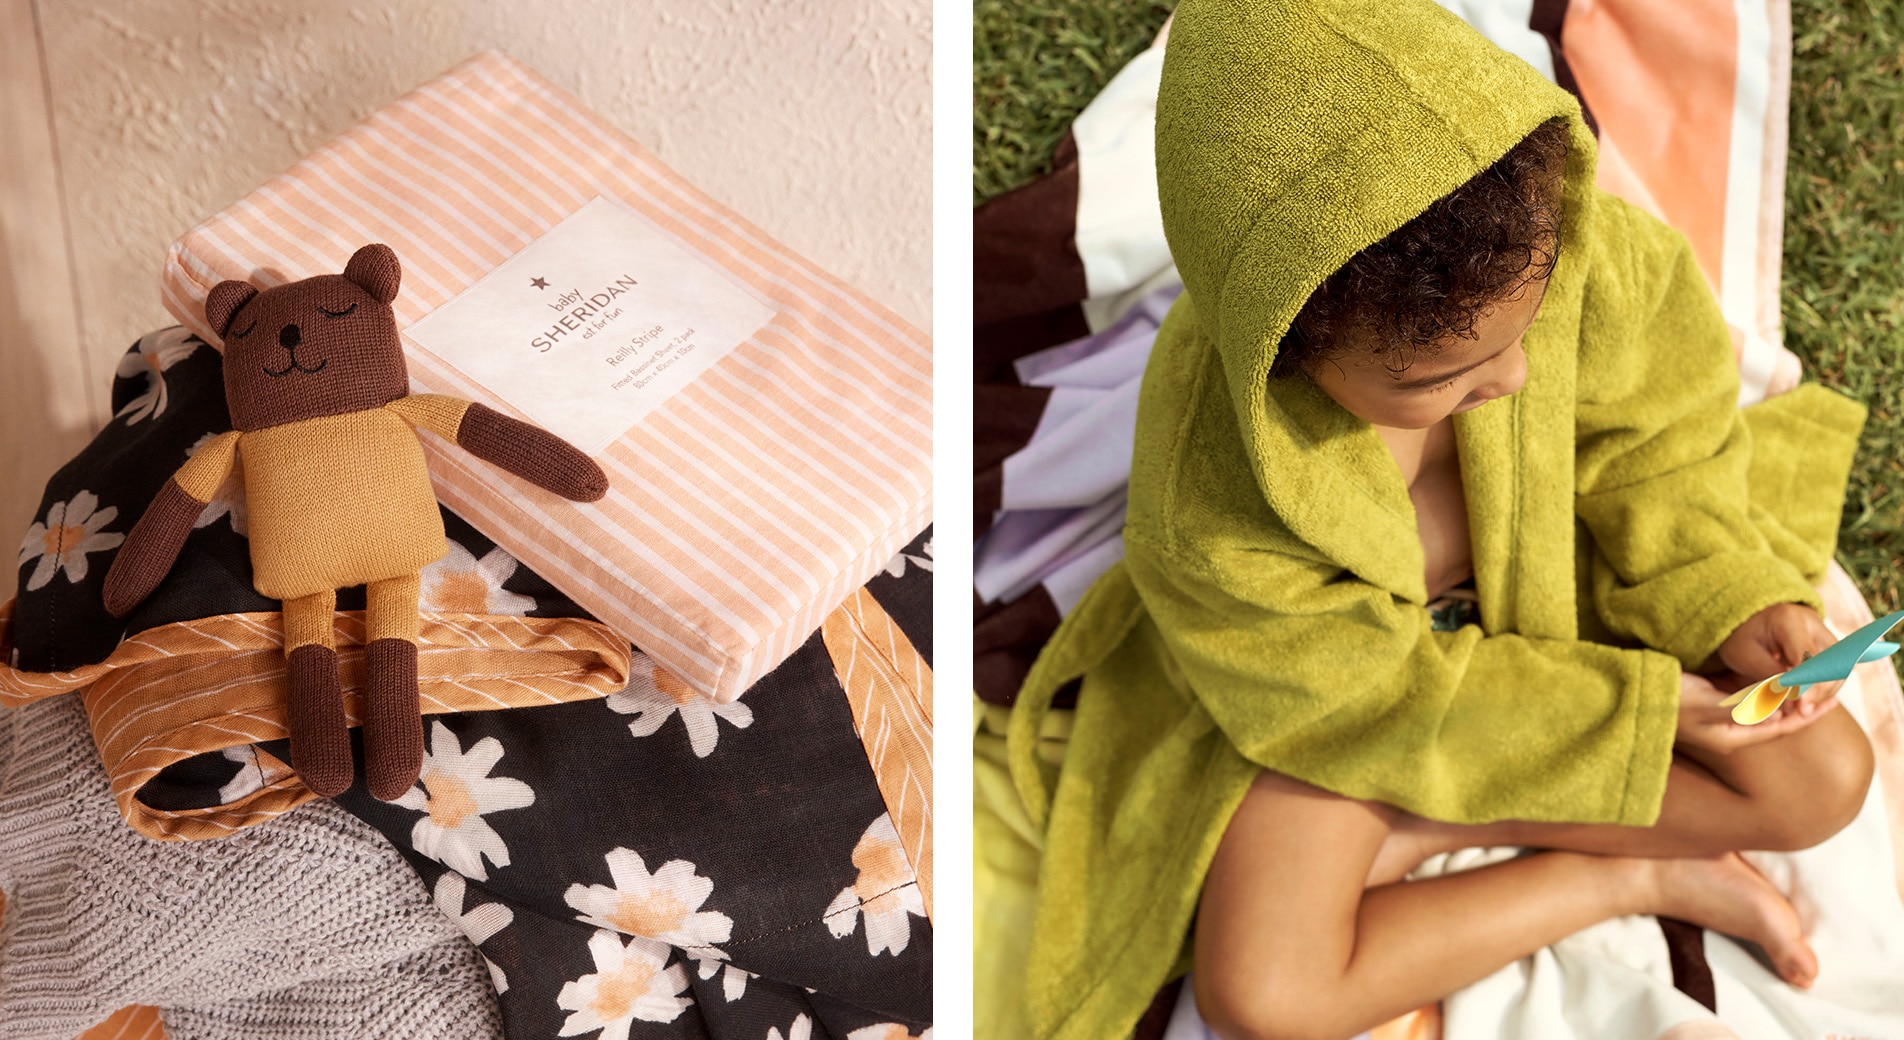 split image. left side: a stack of baby wraps, blankets and cot sheets, in shades of peach, black, white and grey. right side: small child with brown curly hair and light brown skin sits on a towel on the ground, wearing the sheridan ottie robe.